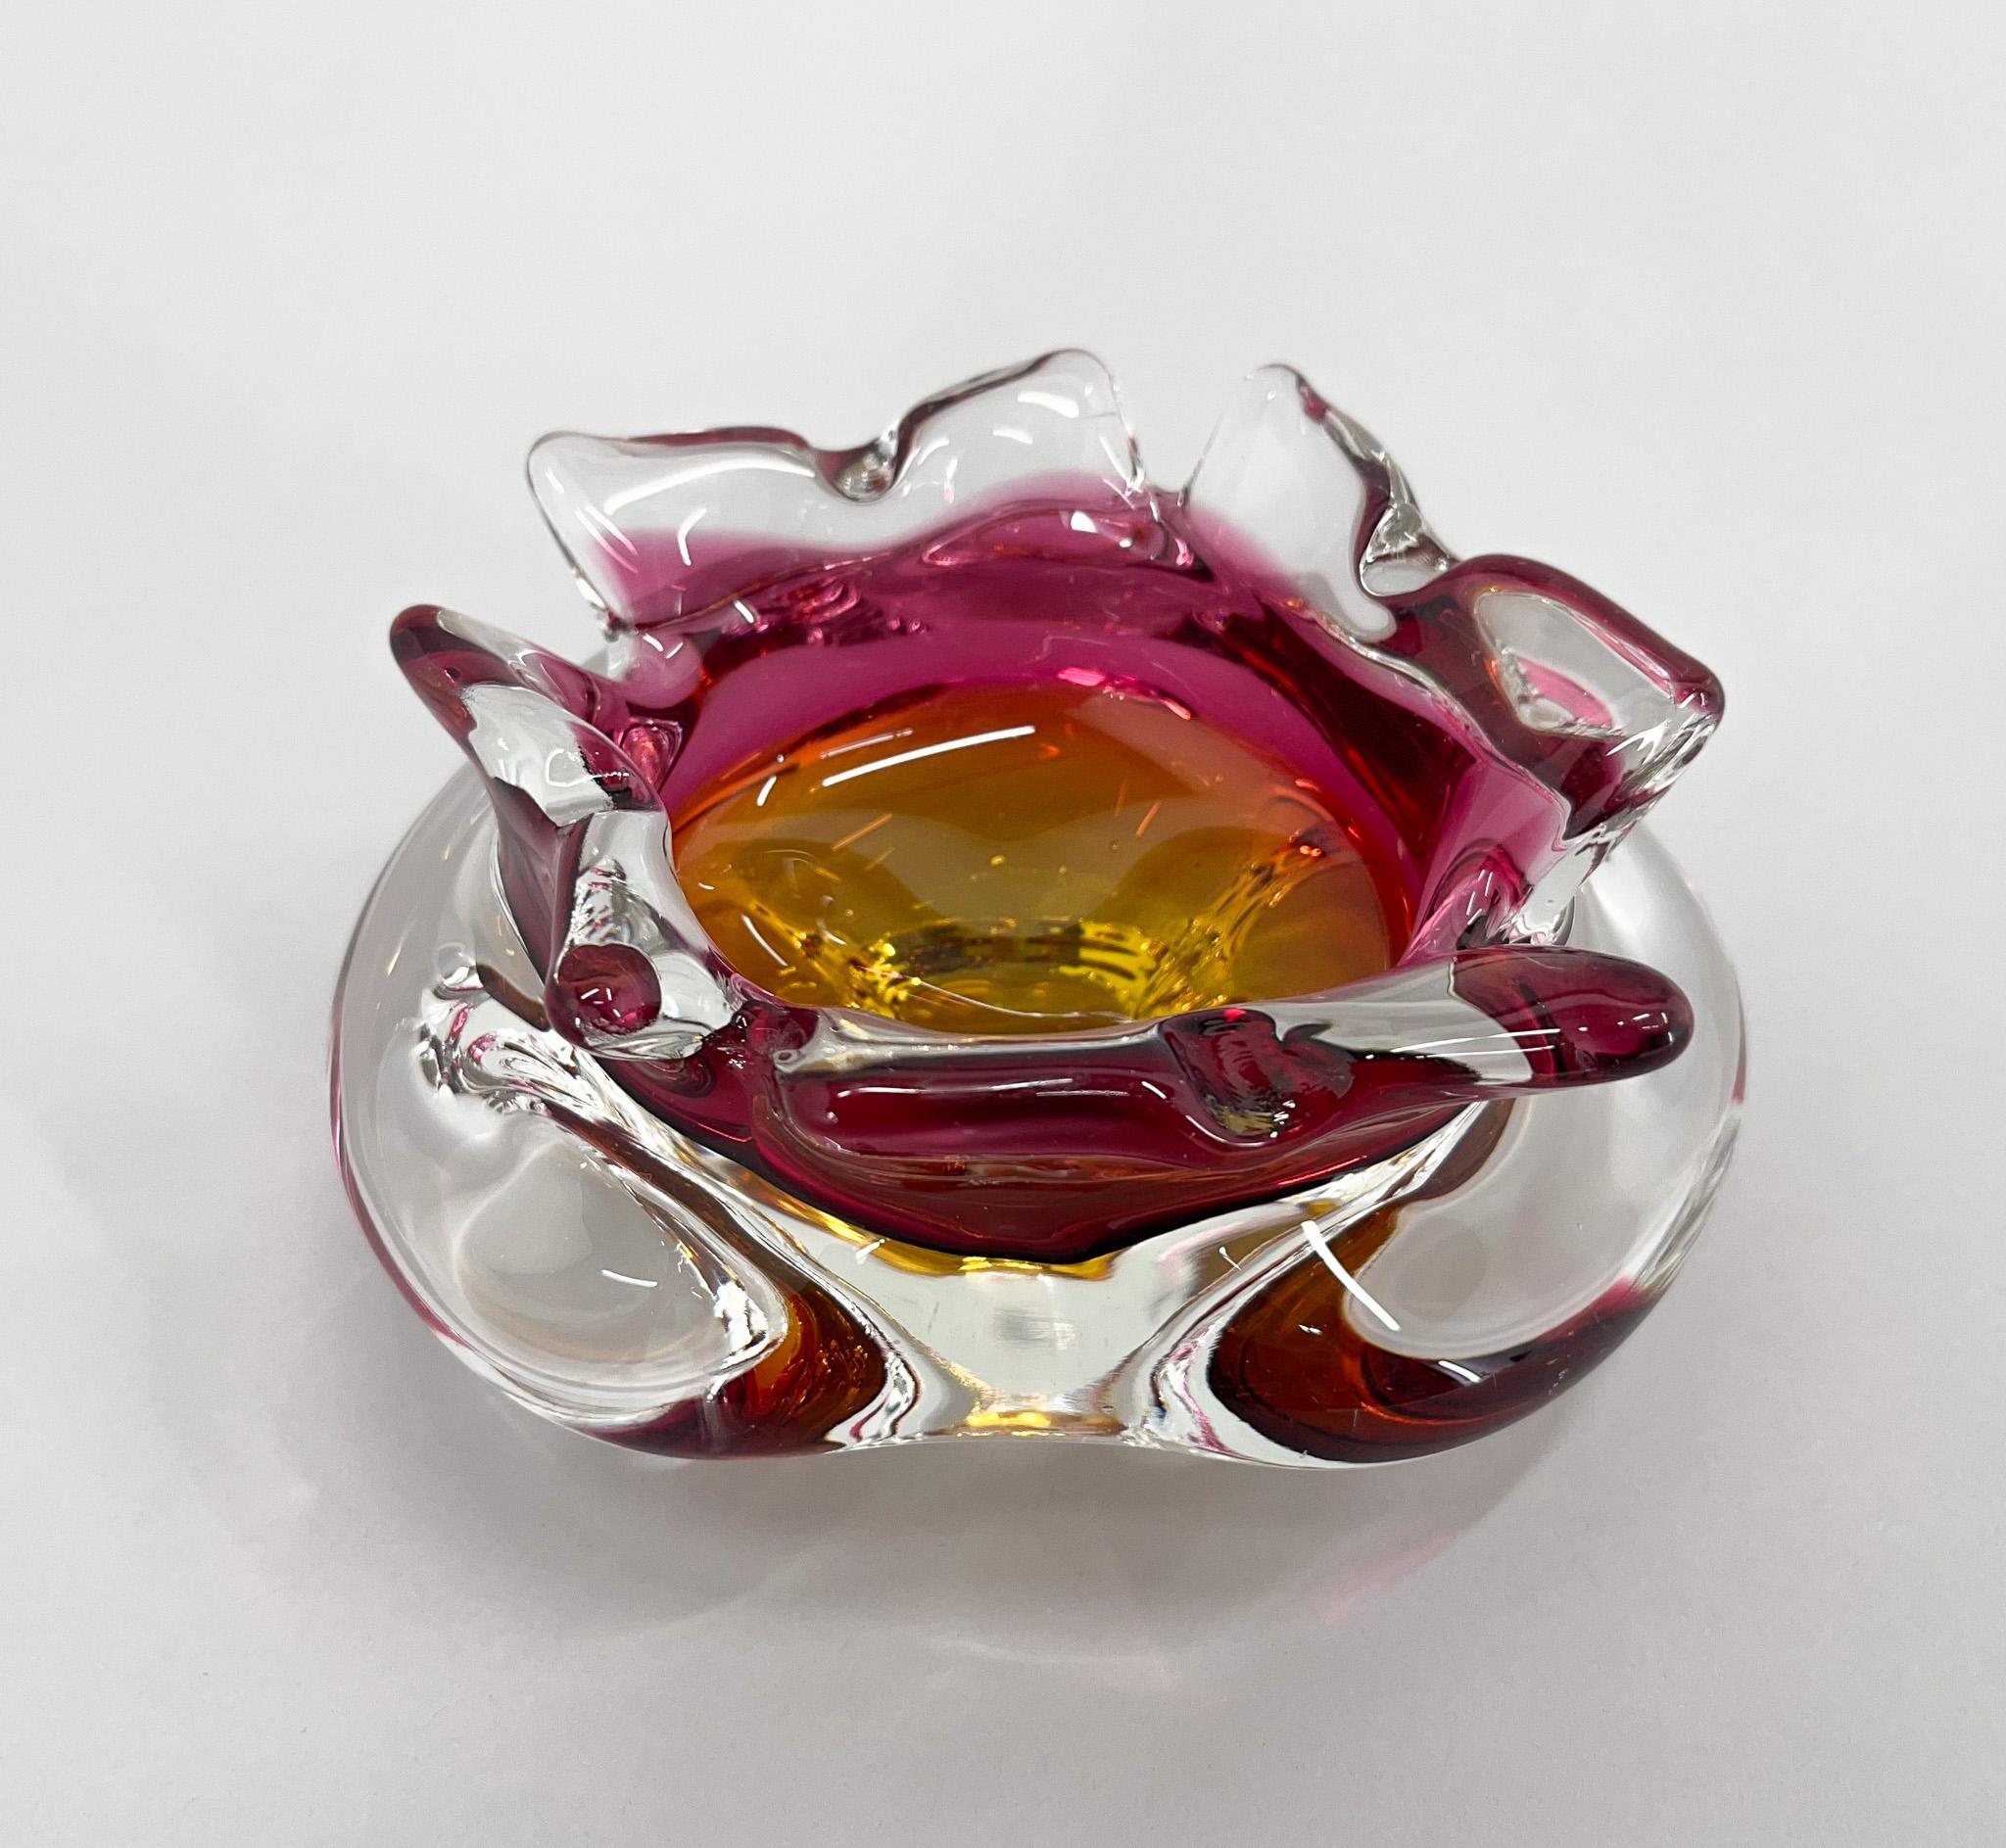 This beautiful bowl was designed by Josef Hospodka and made by the Chribska Glassworks. In a very good vintage condition.